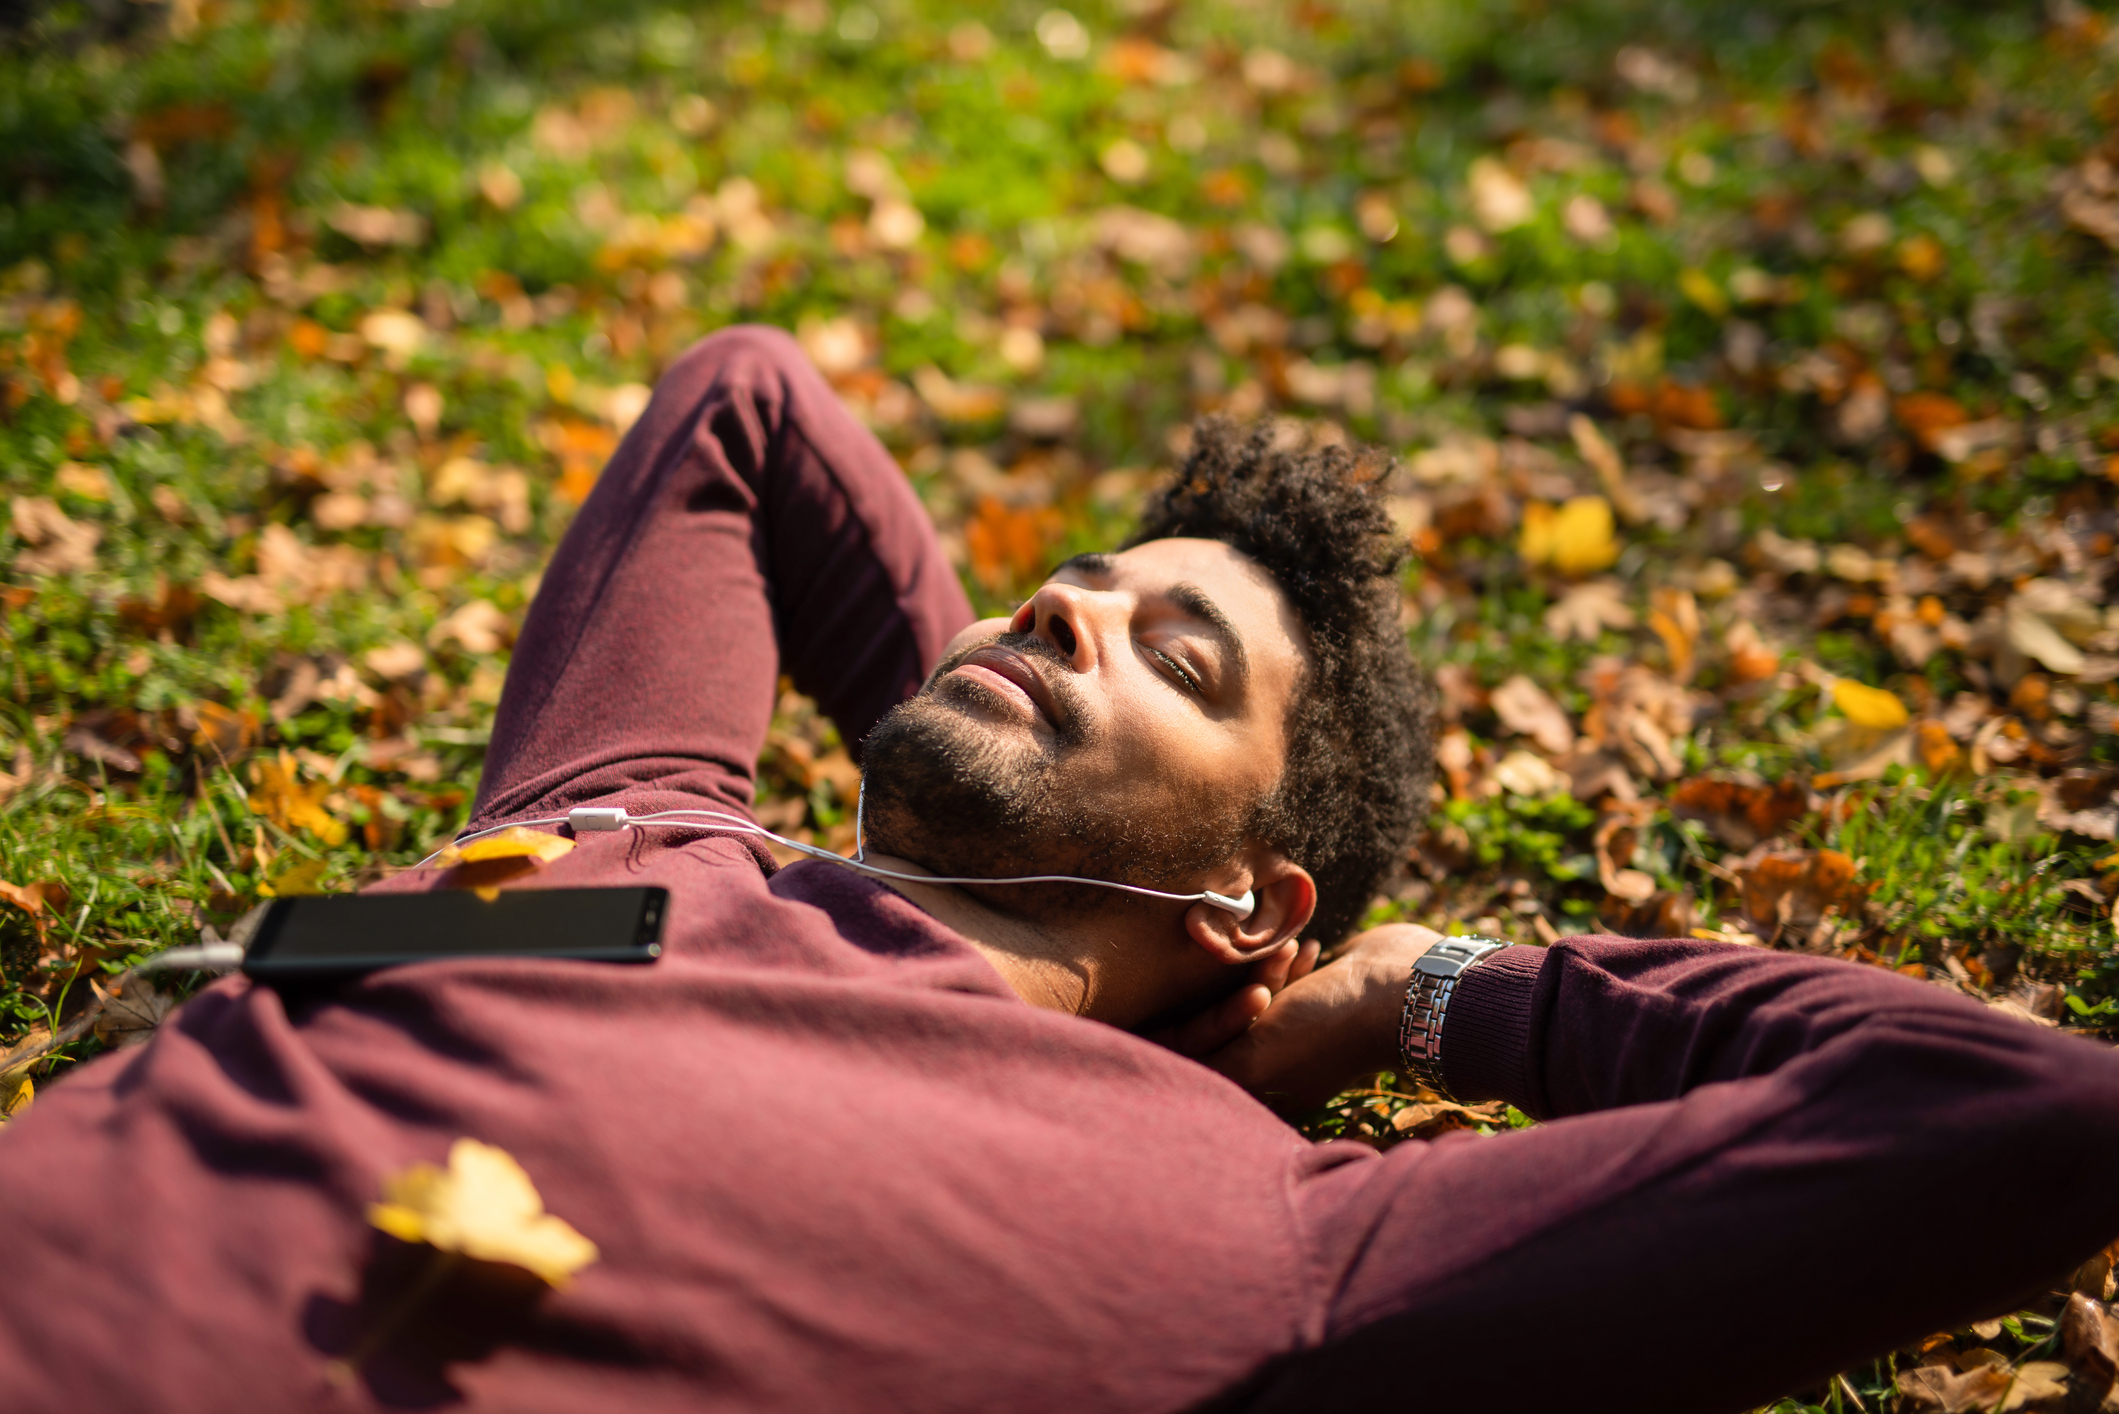 Man lying on grass with eyes closed and headphones on